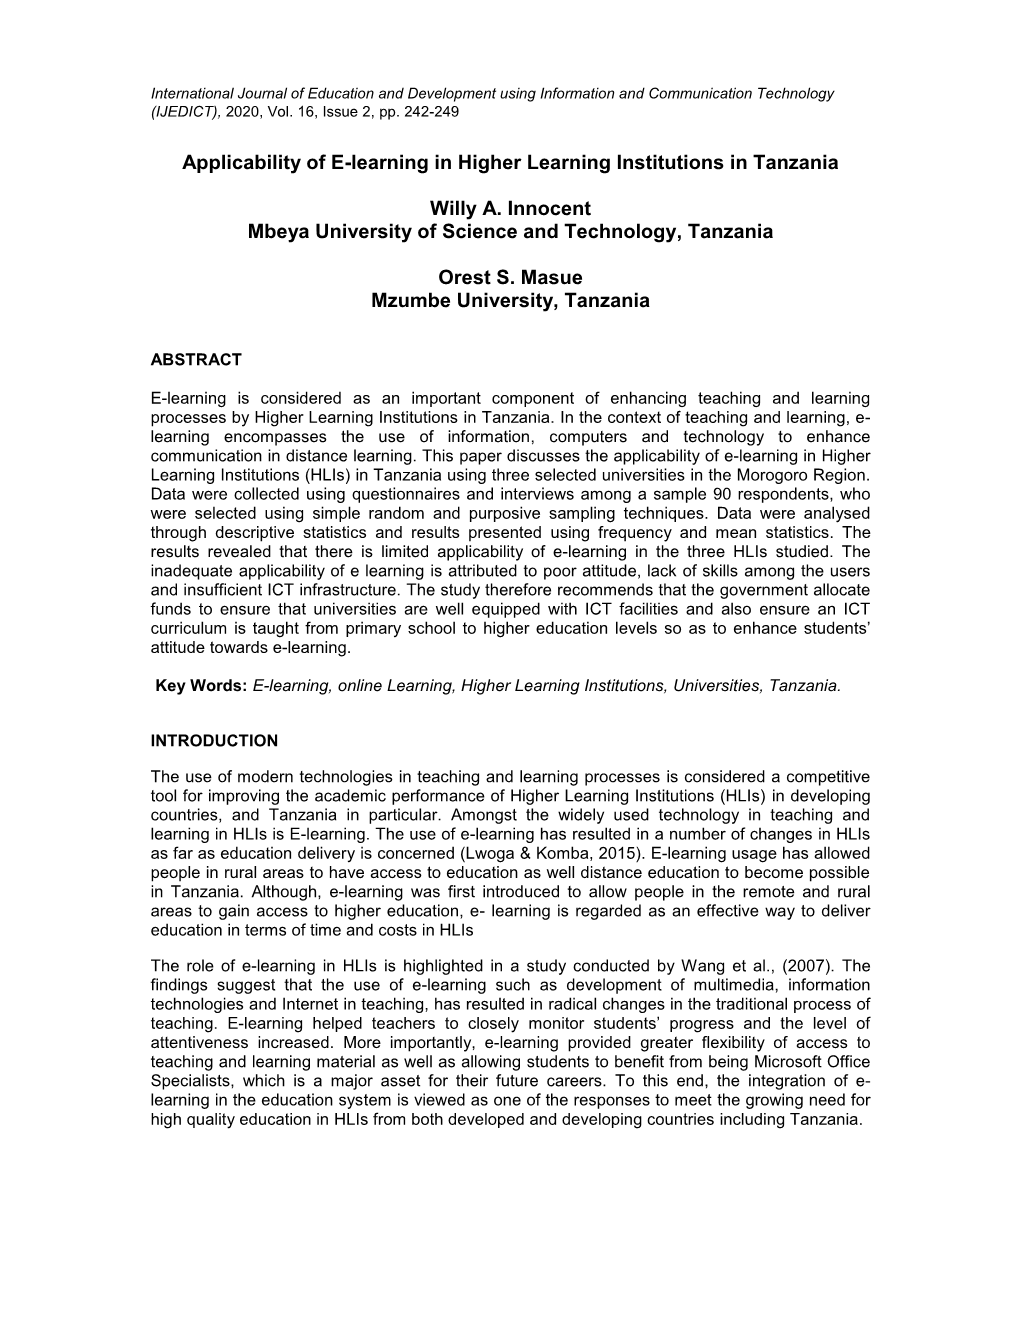 Applicability of E-Learning in Higher Learning Institutions in Tanzania